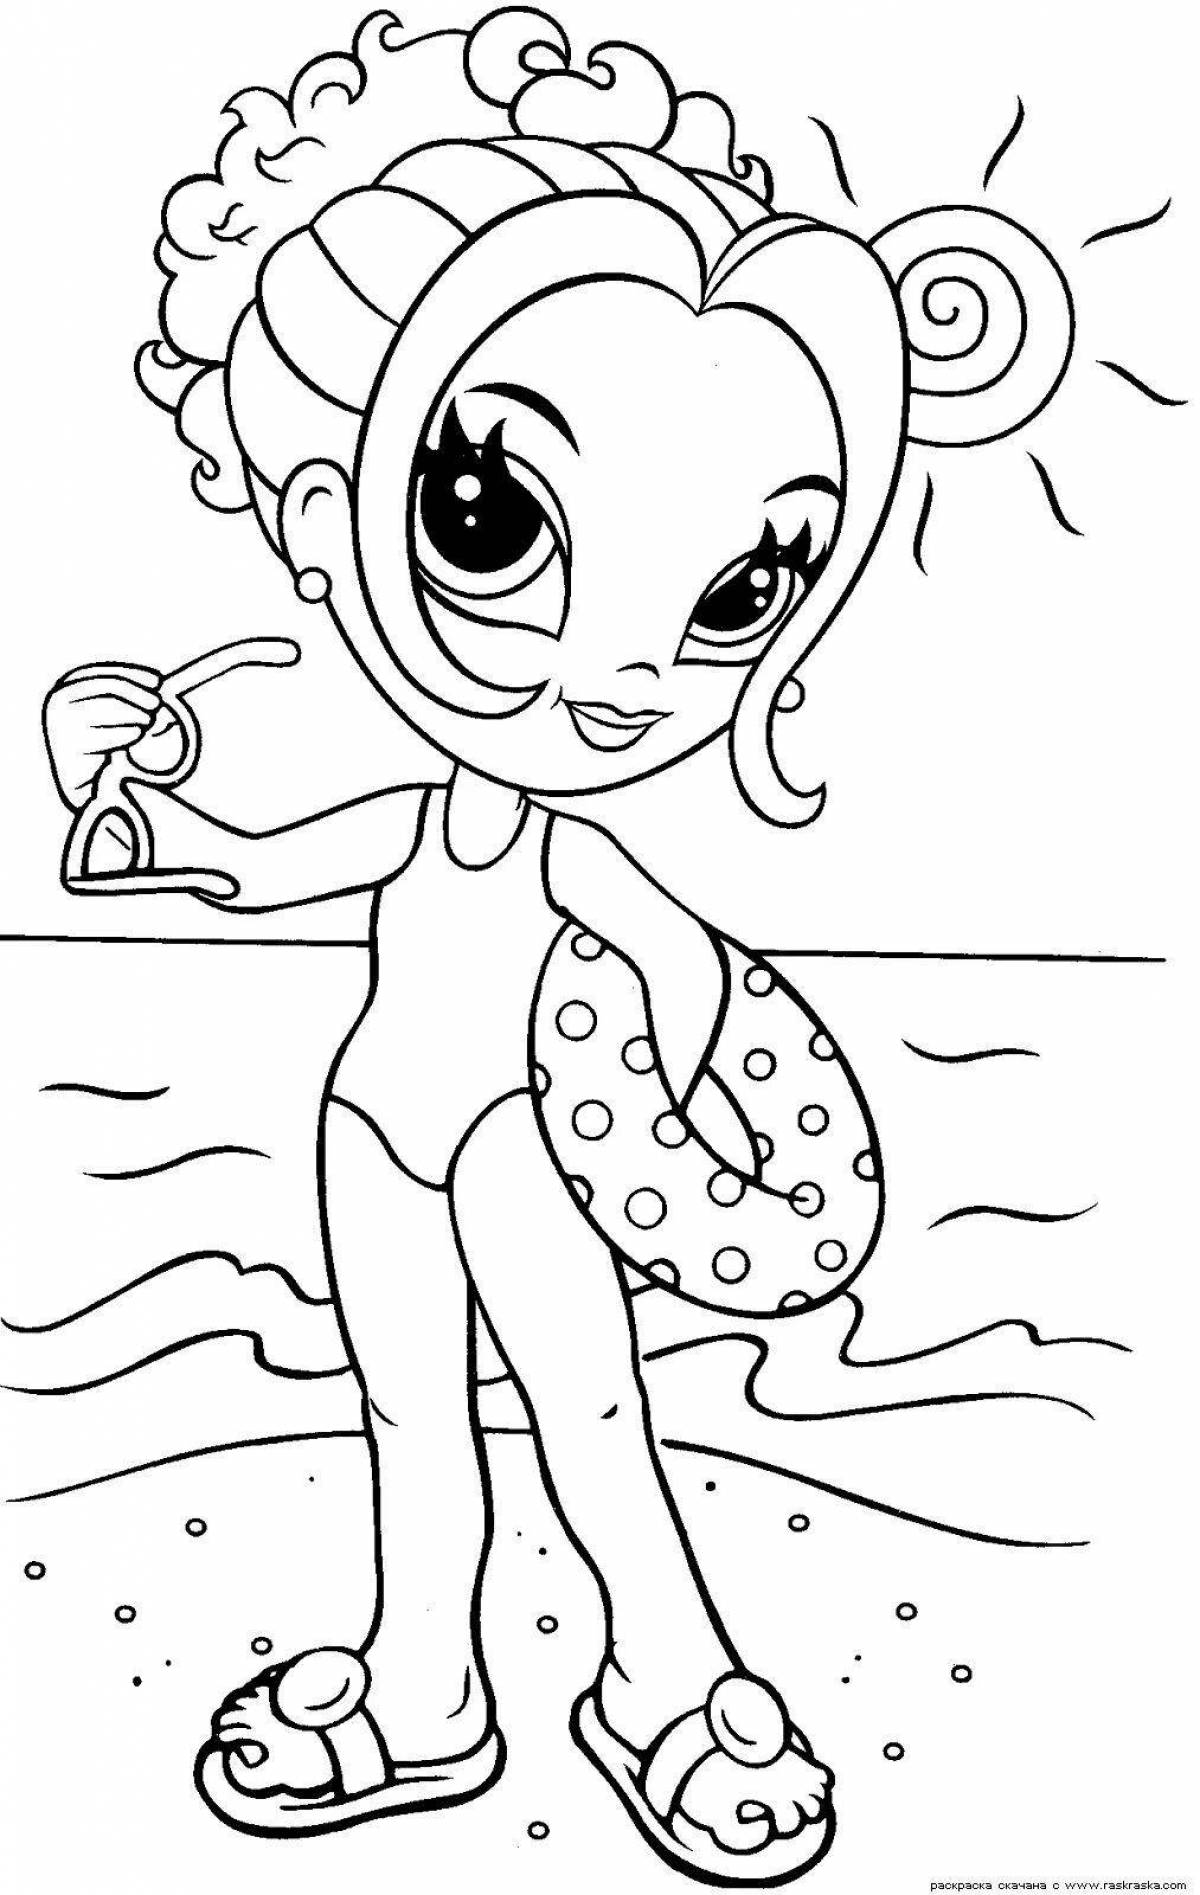 Dazzling coloring page coloring book for girls 6 7 years old